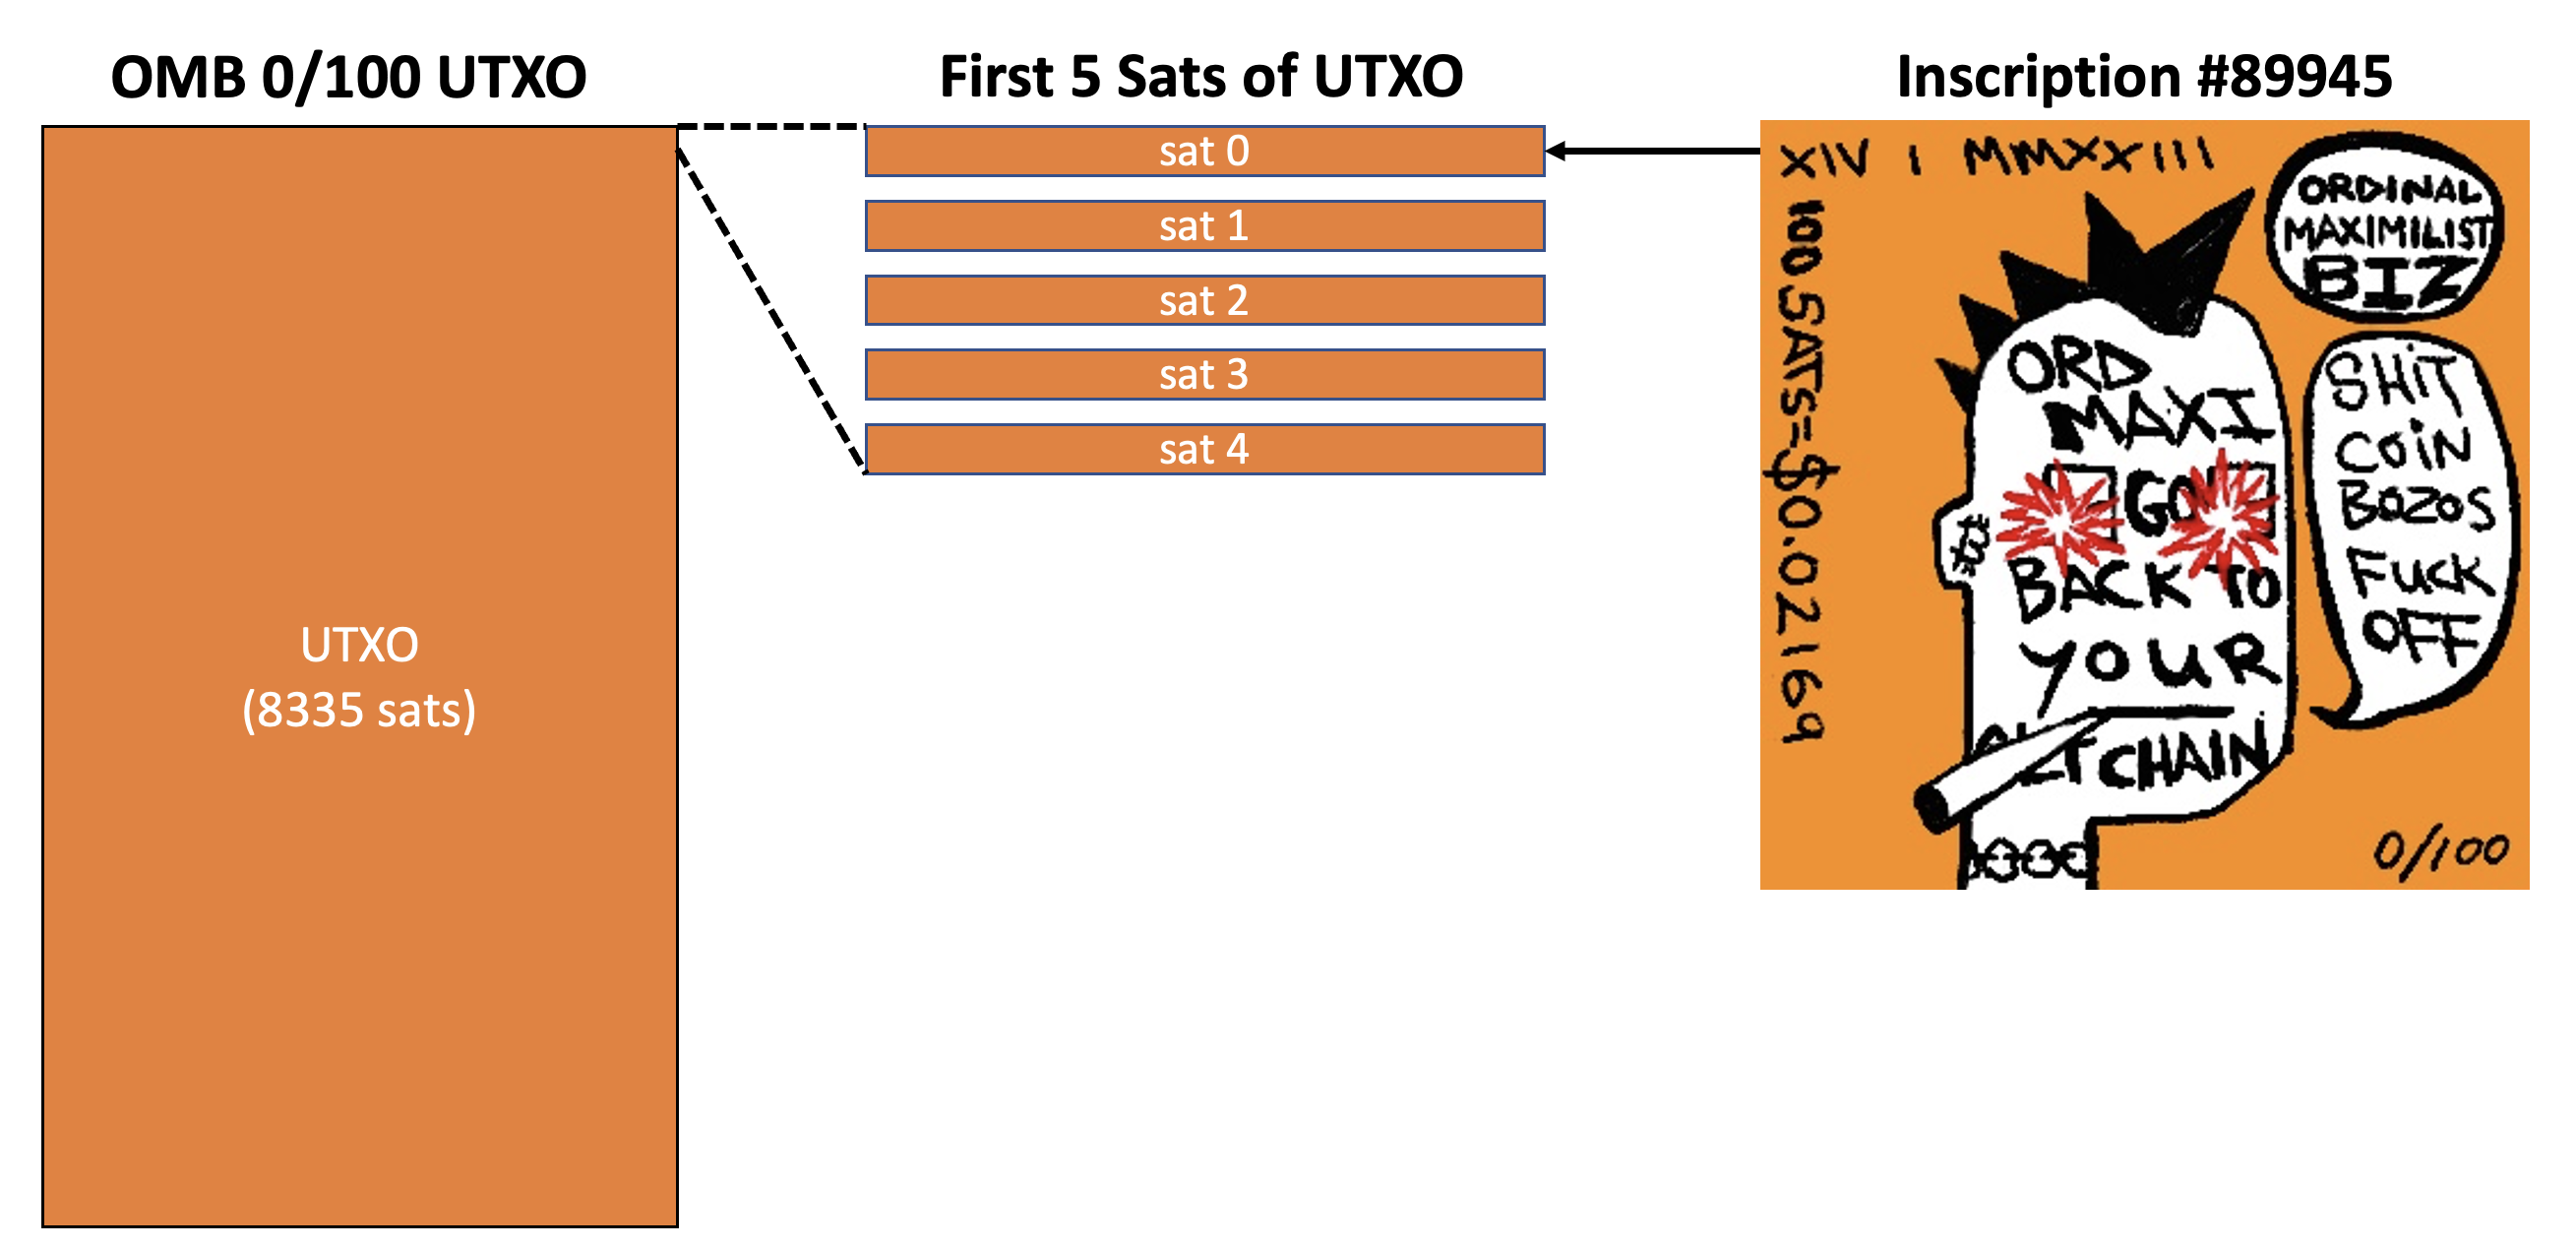 The inscription data lives on the first sat of the UTXO. All other sats are expendable!